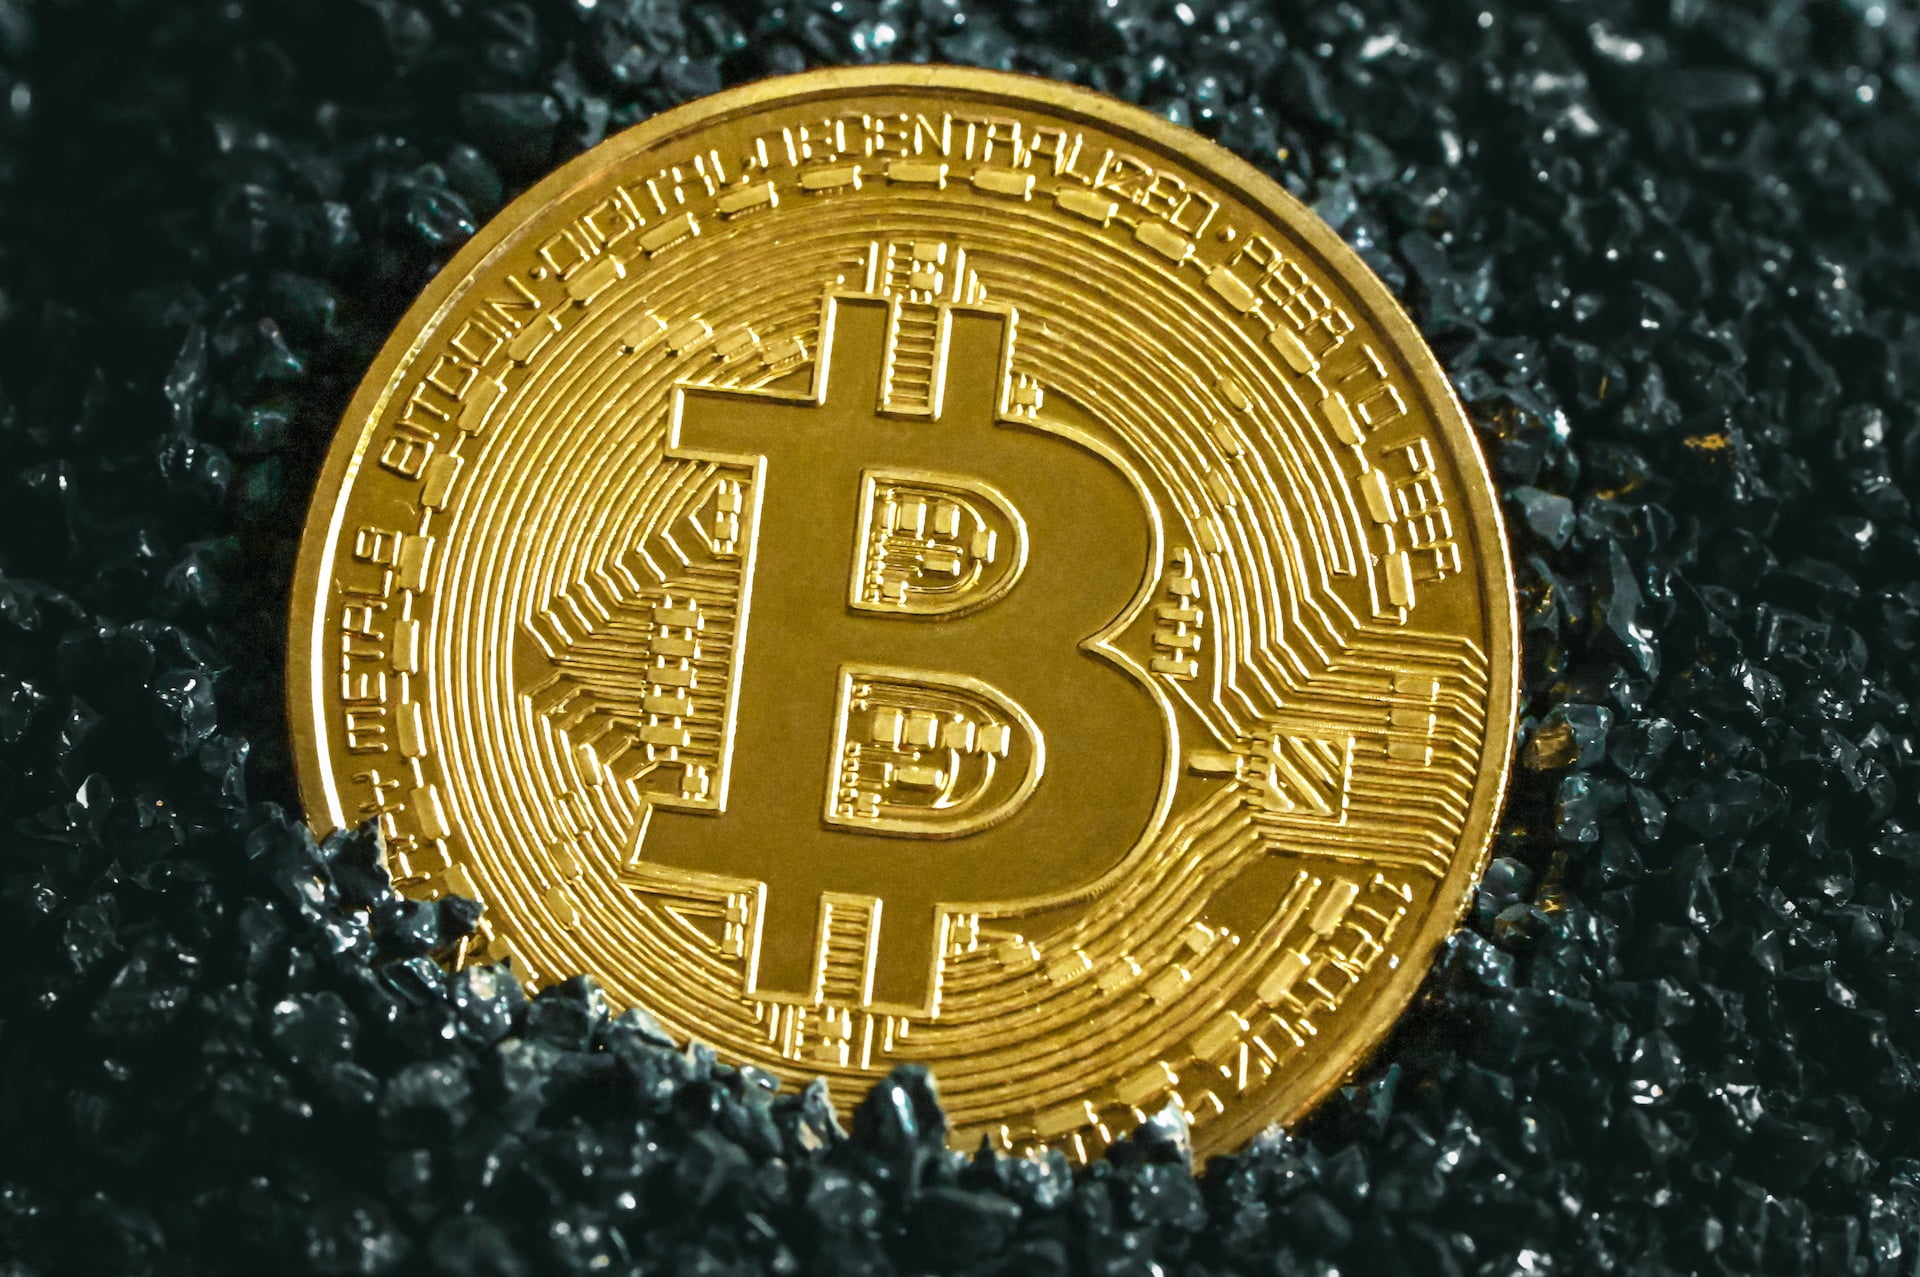 Dormant Bitcoin Wallet Moves $30M After 11-Year Slumber: Mysterious Awakening